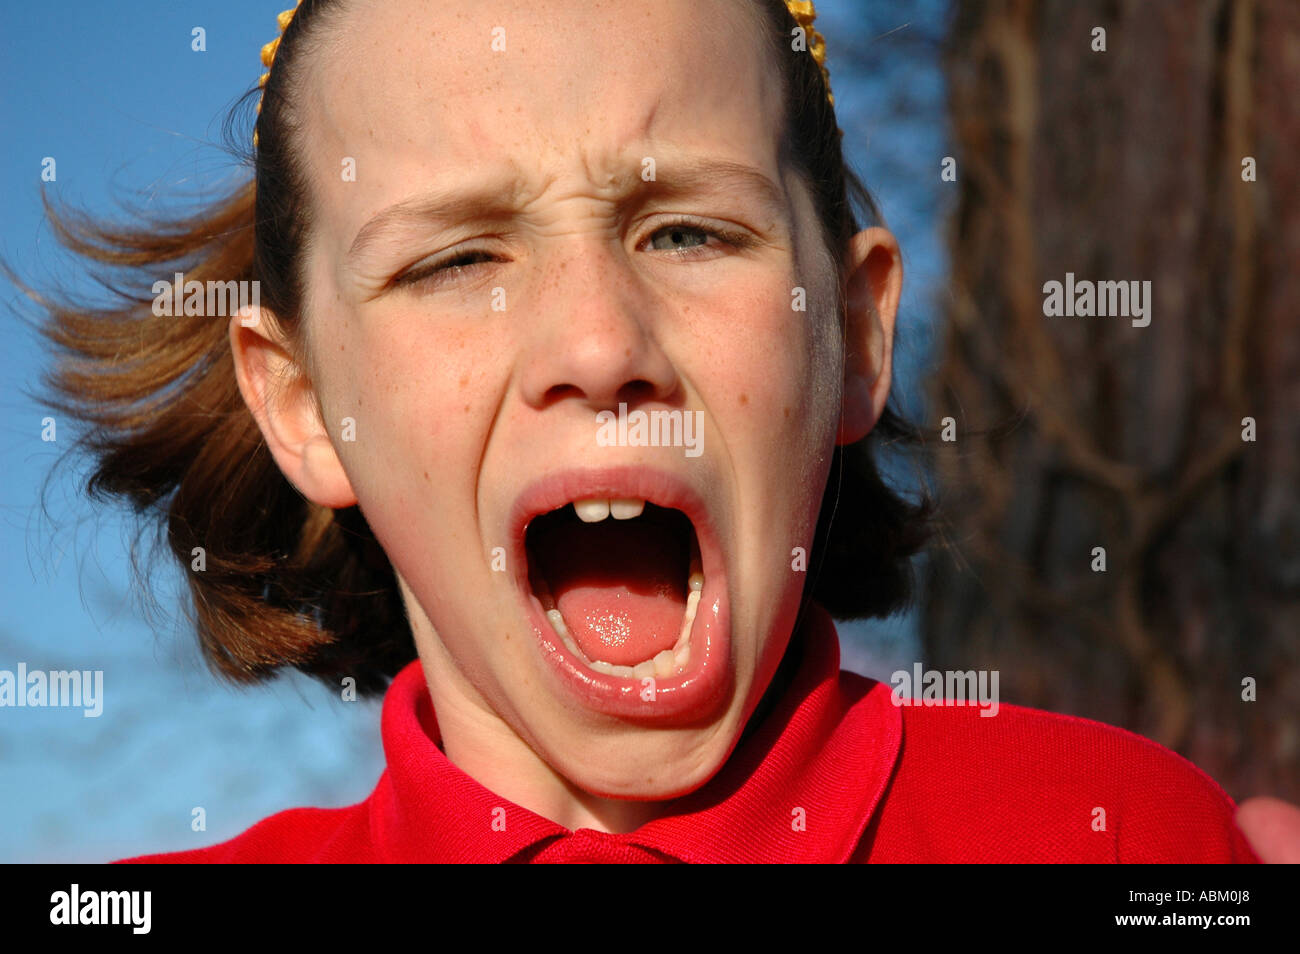 portrait of child looking disgusted and pulling a funny face Stock Photo